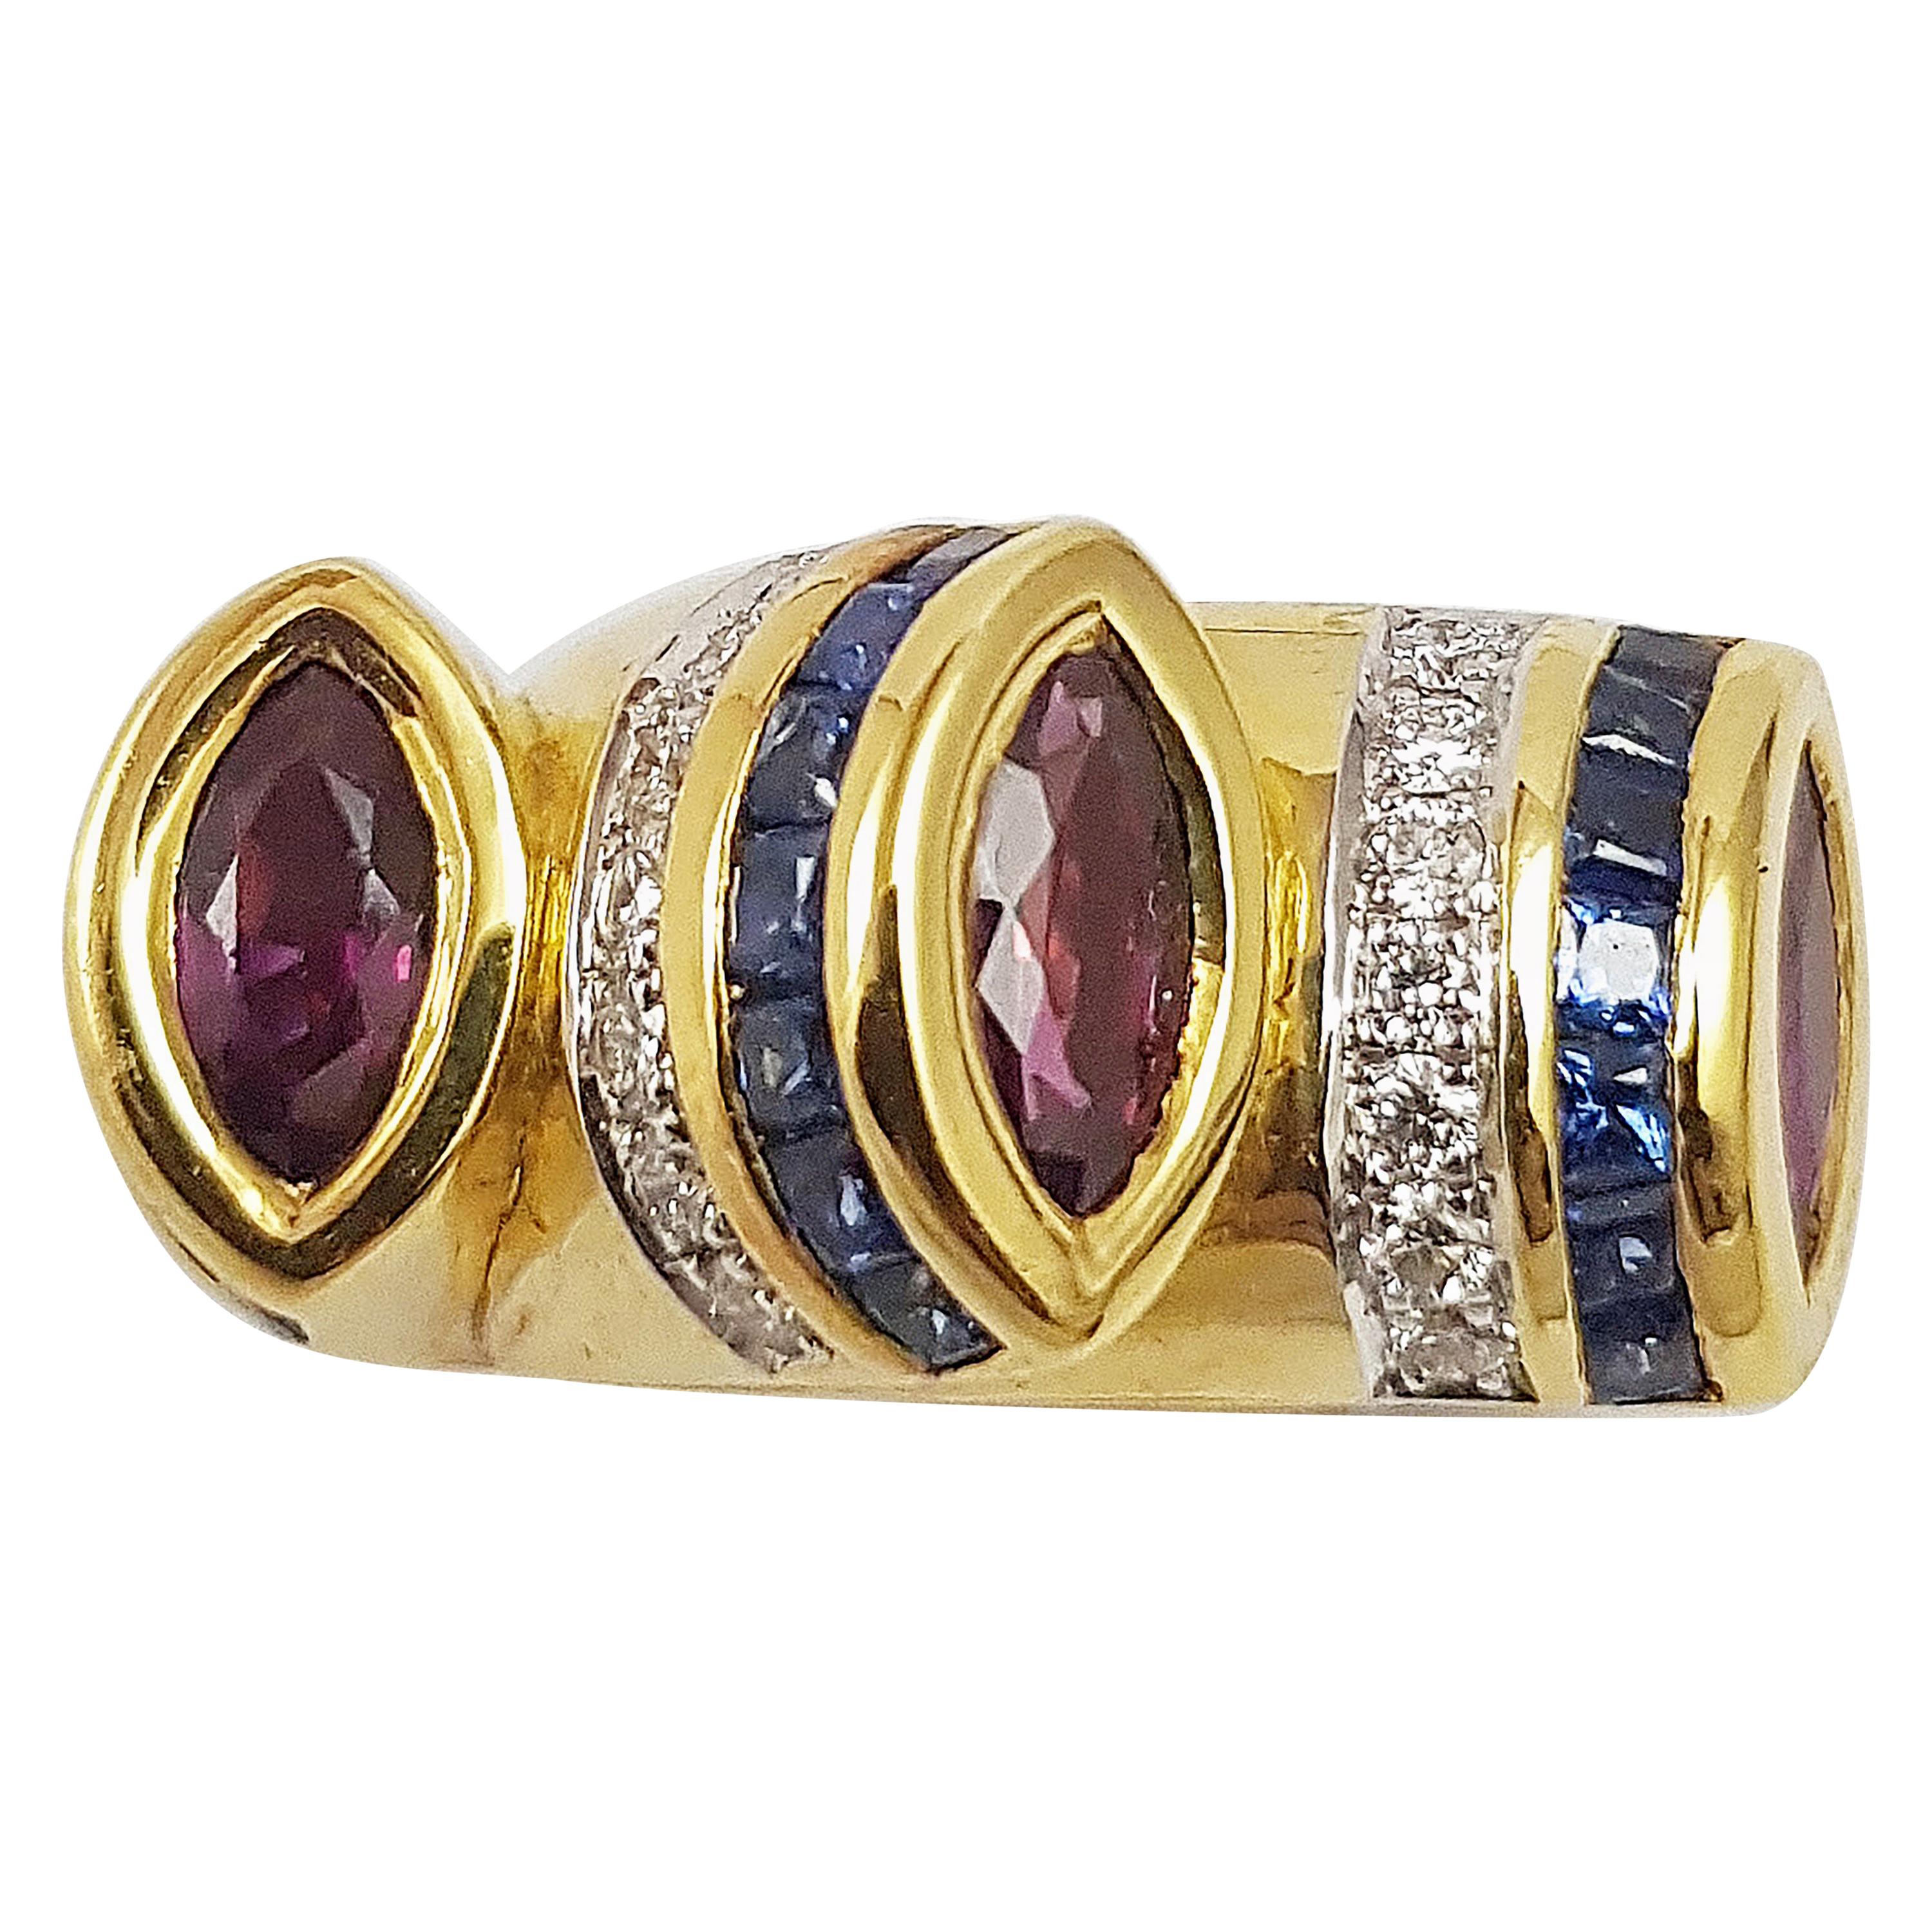 Ruby, Blue Sapphire with Diamond Ring Set in 18 Karat Gold Settings